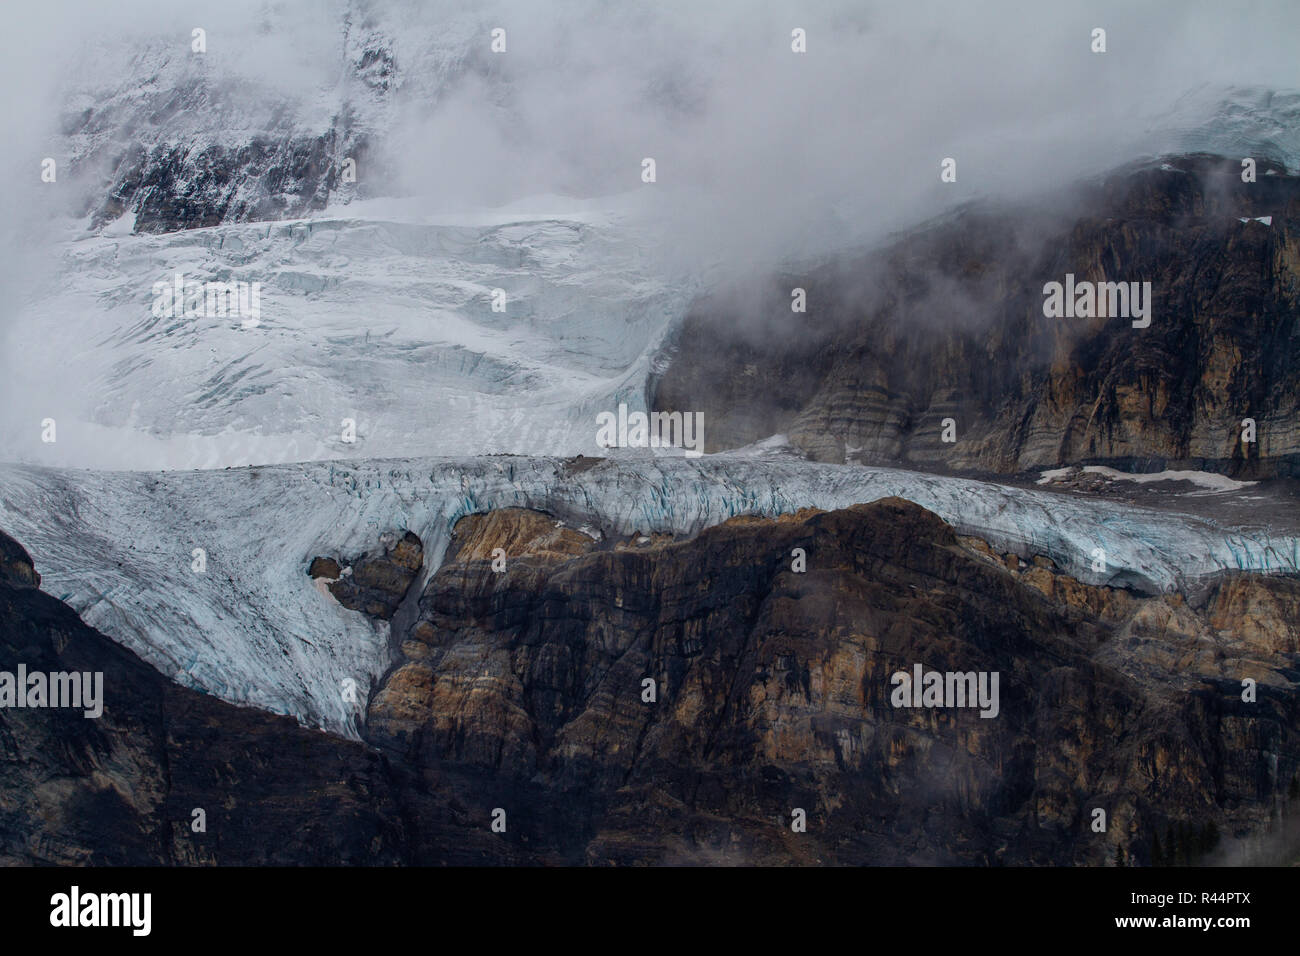 Crows Foot Glacier shrouded in cloud. Stock Photo